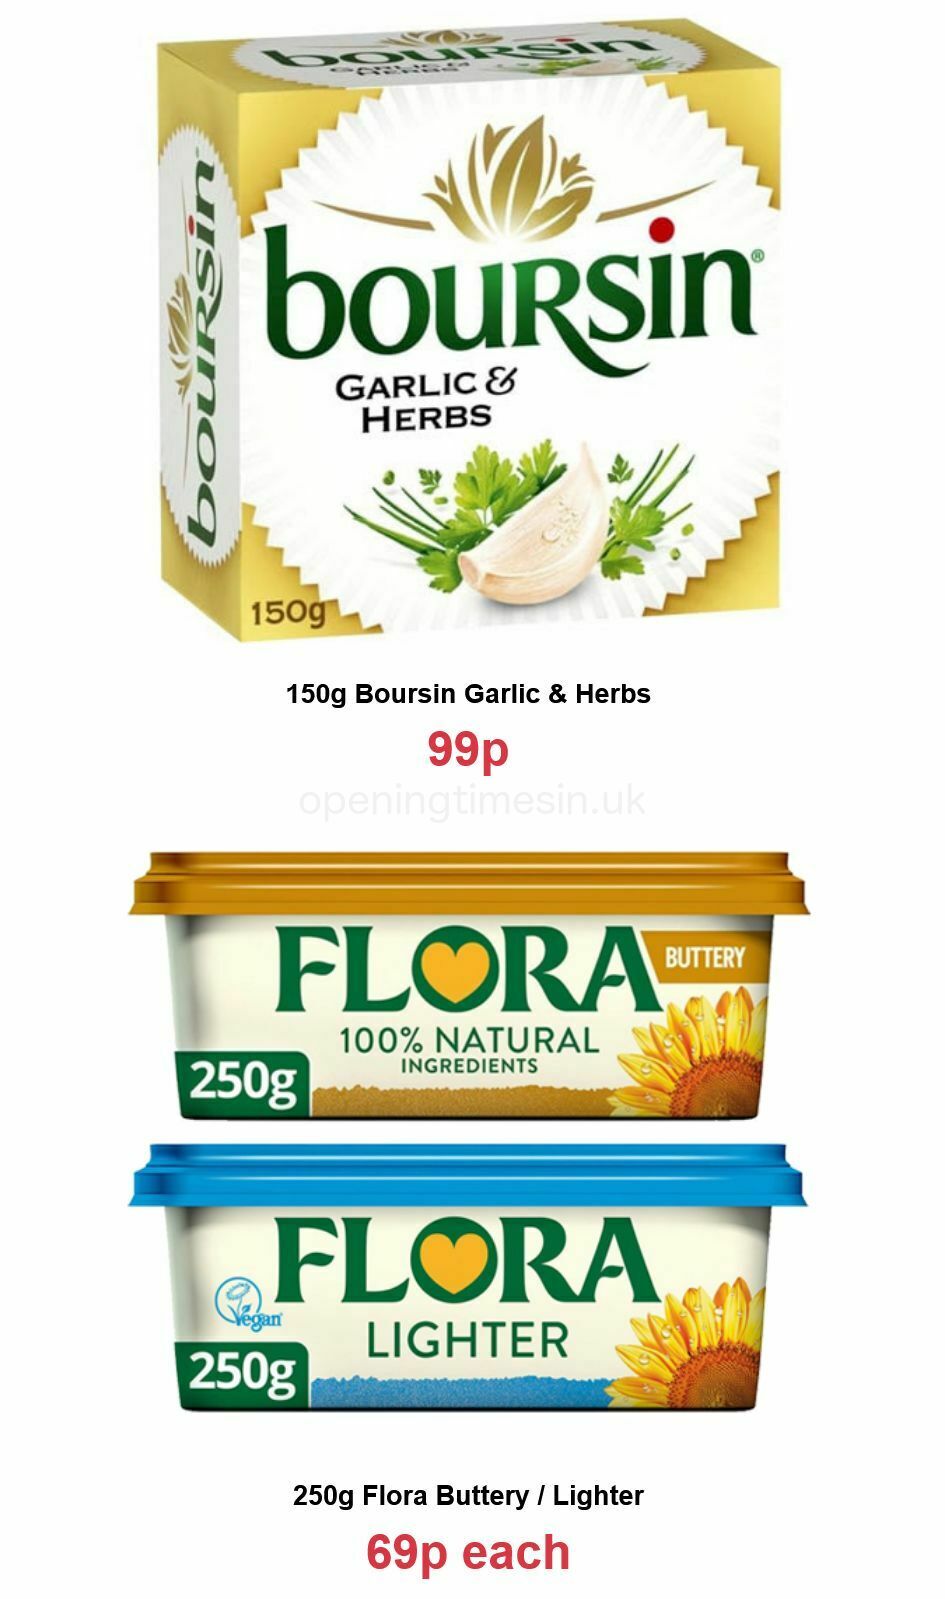 Farmfoods Offers from 10 January